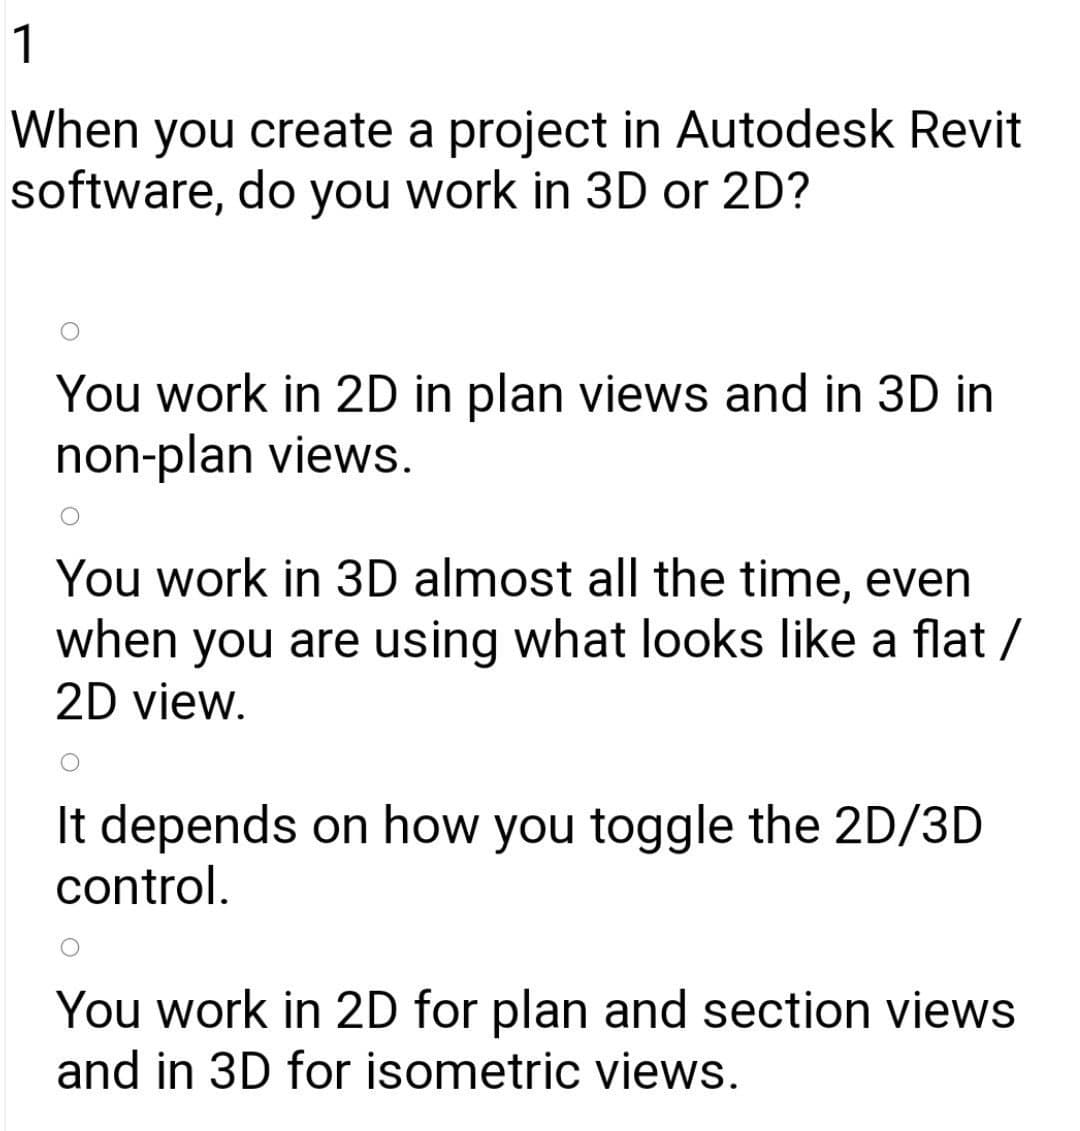 1
When you create a project in Autodesk Revit
software, do you work in 3D or 2D?
You work in 2D in plan views and in 3D in
non-plan views.
You work in 3D almost all the time, even
when you are using what looks like a flat /
2D view.
It depends on how you toggle the 2D/3D
control.
You work in 2D for plan and section views
and in 3D for isometric views.
